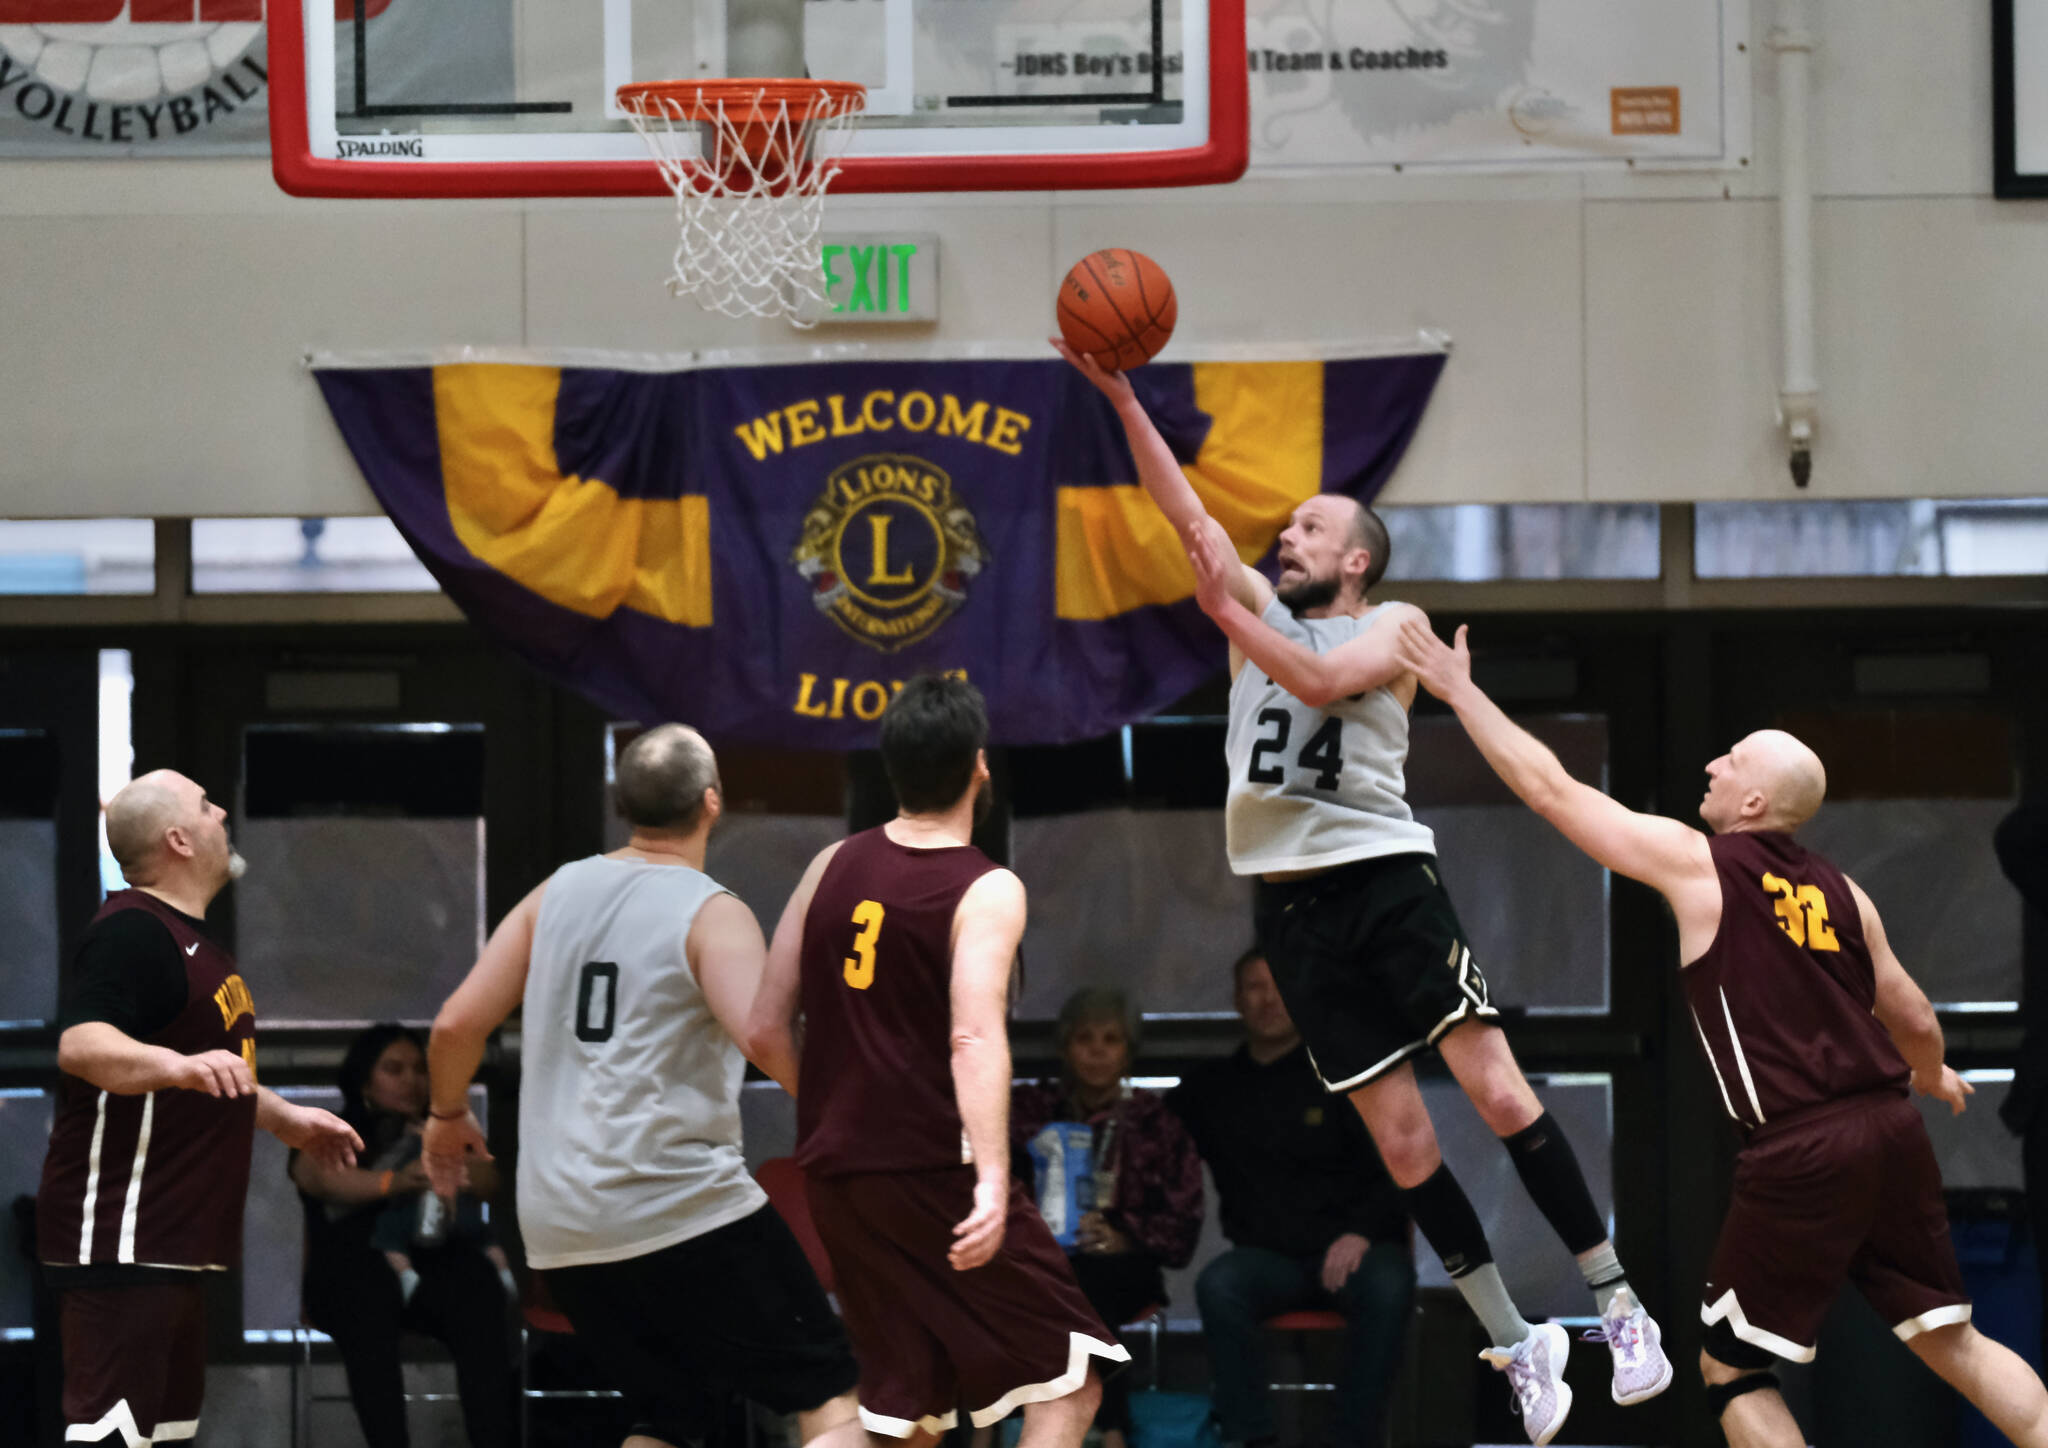 Filcom’s Alex Heumann (24) scores past Klukwan’s Paul Carrington (3) and Brian Friske (32) during the C Bracket Championship game of the Gold Medal Basketball Tournament, Saturday, March 25, at Juneau-Douglas High School: Yadaa.at Kalé. (Klas Stolpe/For the Juneau Empire)